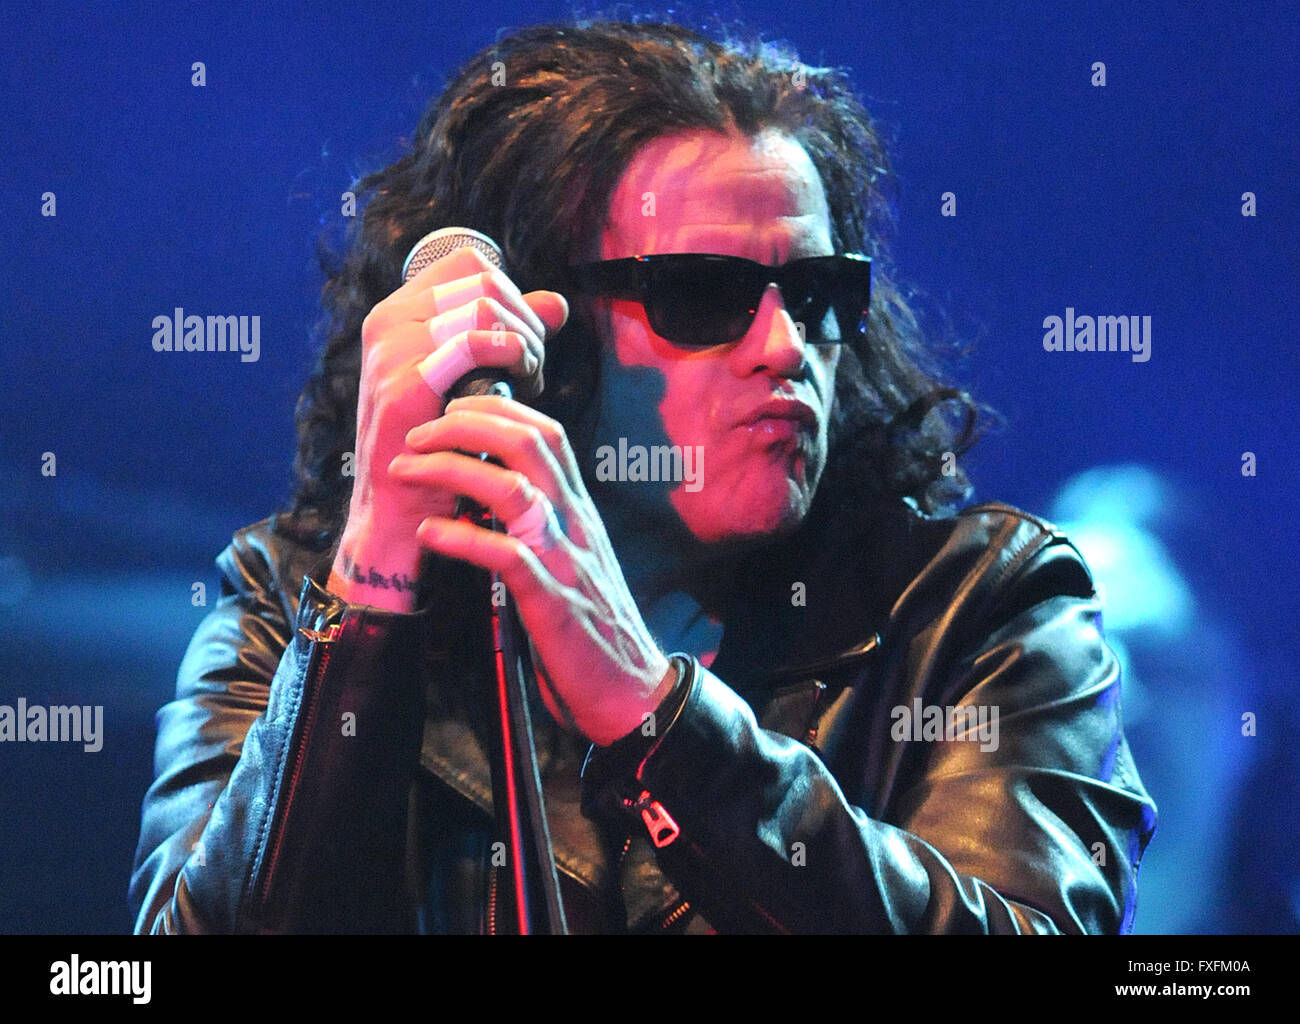 Lake Buena Vista, Florida, USA. 14th April, 2016. Ian Astbury performs with the British rock band The Cult at the House of Blues Orlando in Lake Buena Vista, Florida on April 14, 2016. Credit:  Paul Hennessy/Alamy Live News Stock Photo